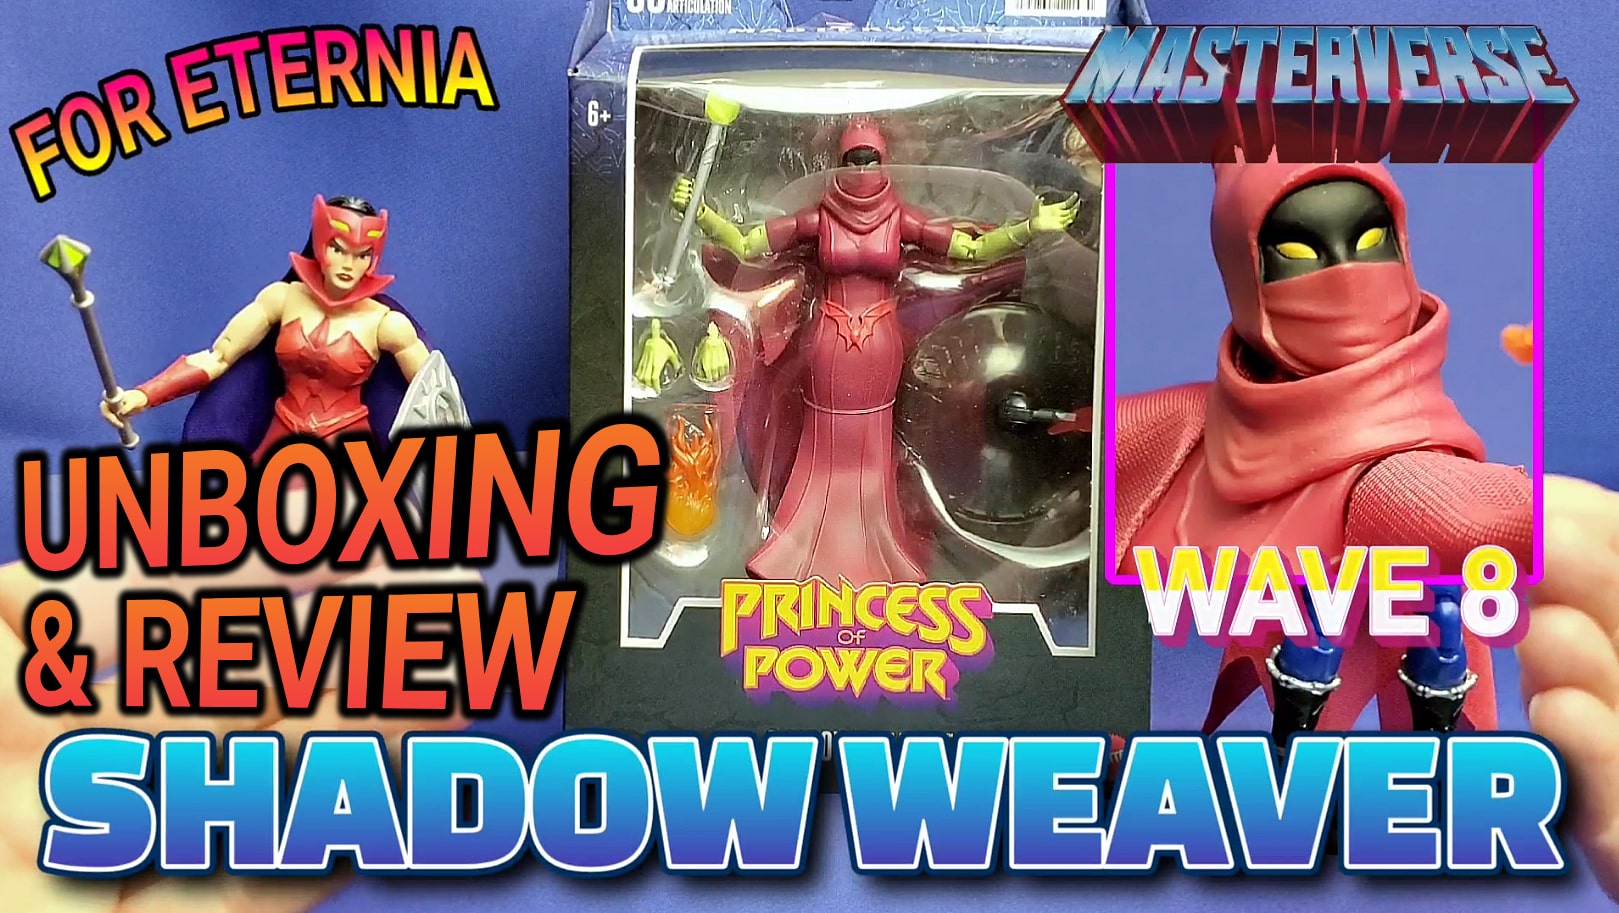 Watch our UNBOXING & REVIEW of the Shadow Weaver, the Wave 8 Princess of Power Masterverse figure